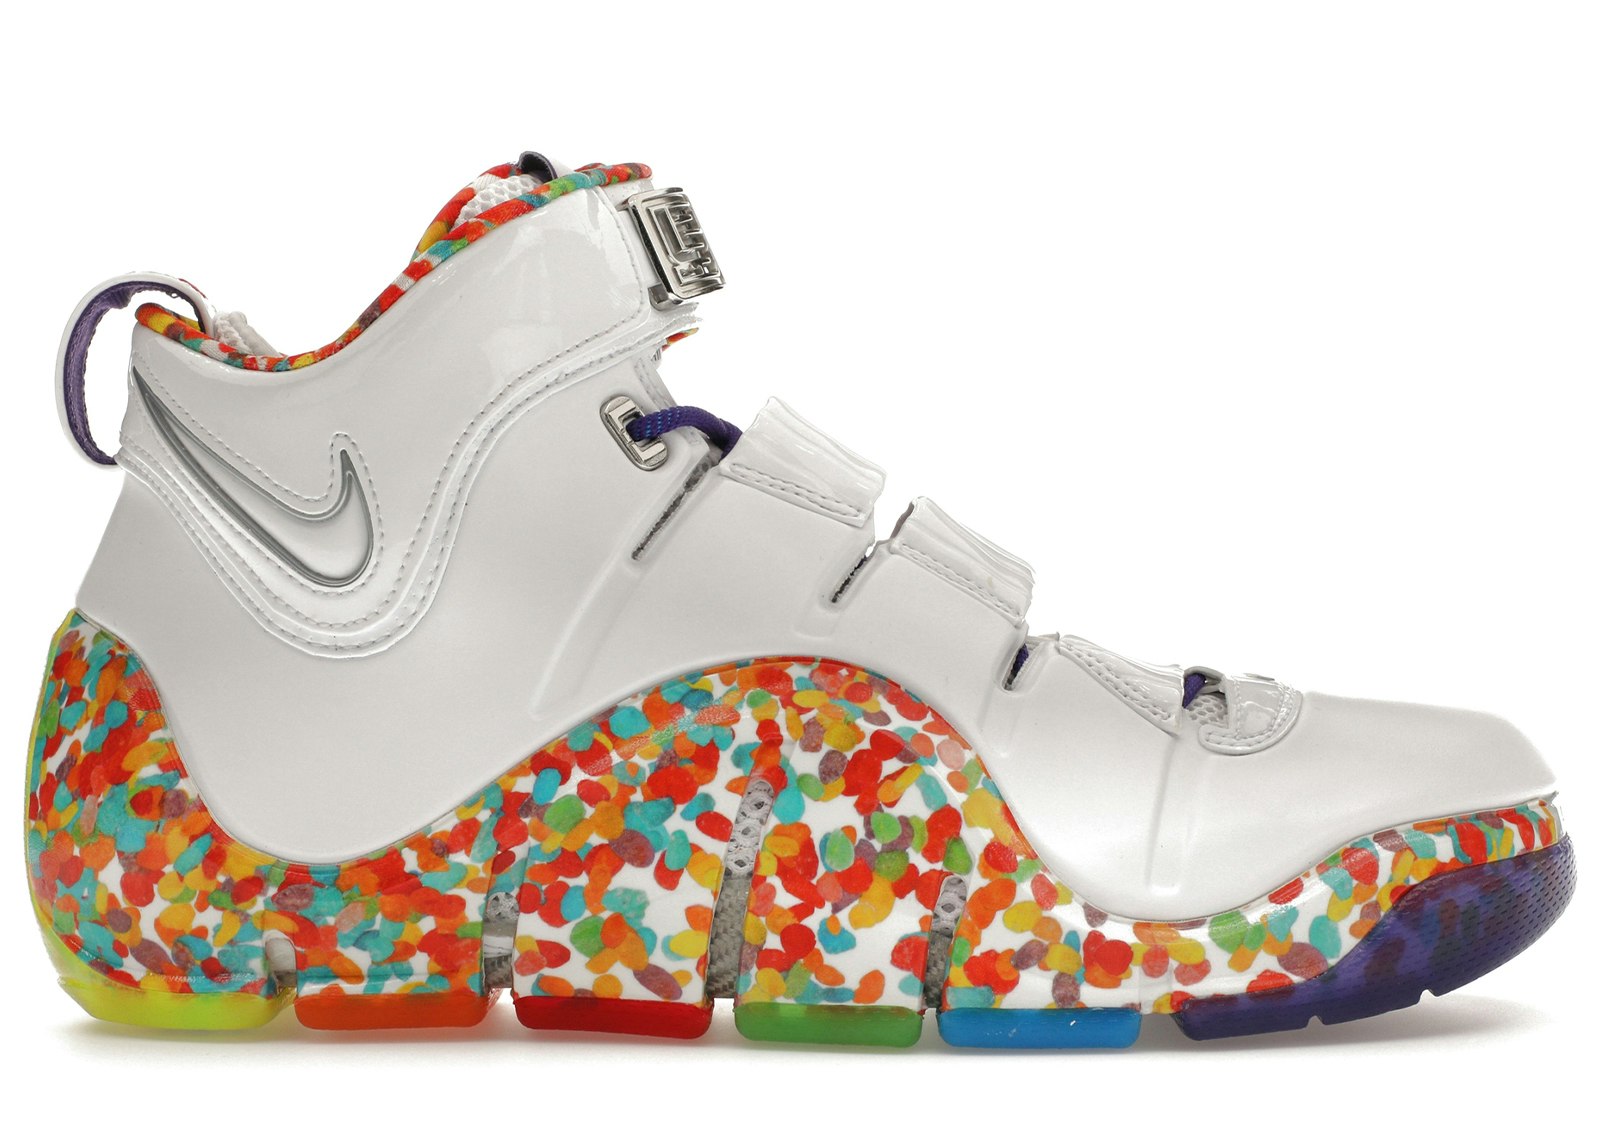 The Most Expensive Nikes Going Up For Sale At Sotheby's Next Sneaker  Auction - GQ Middle East